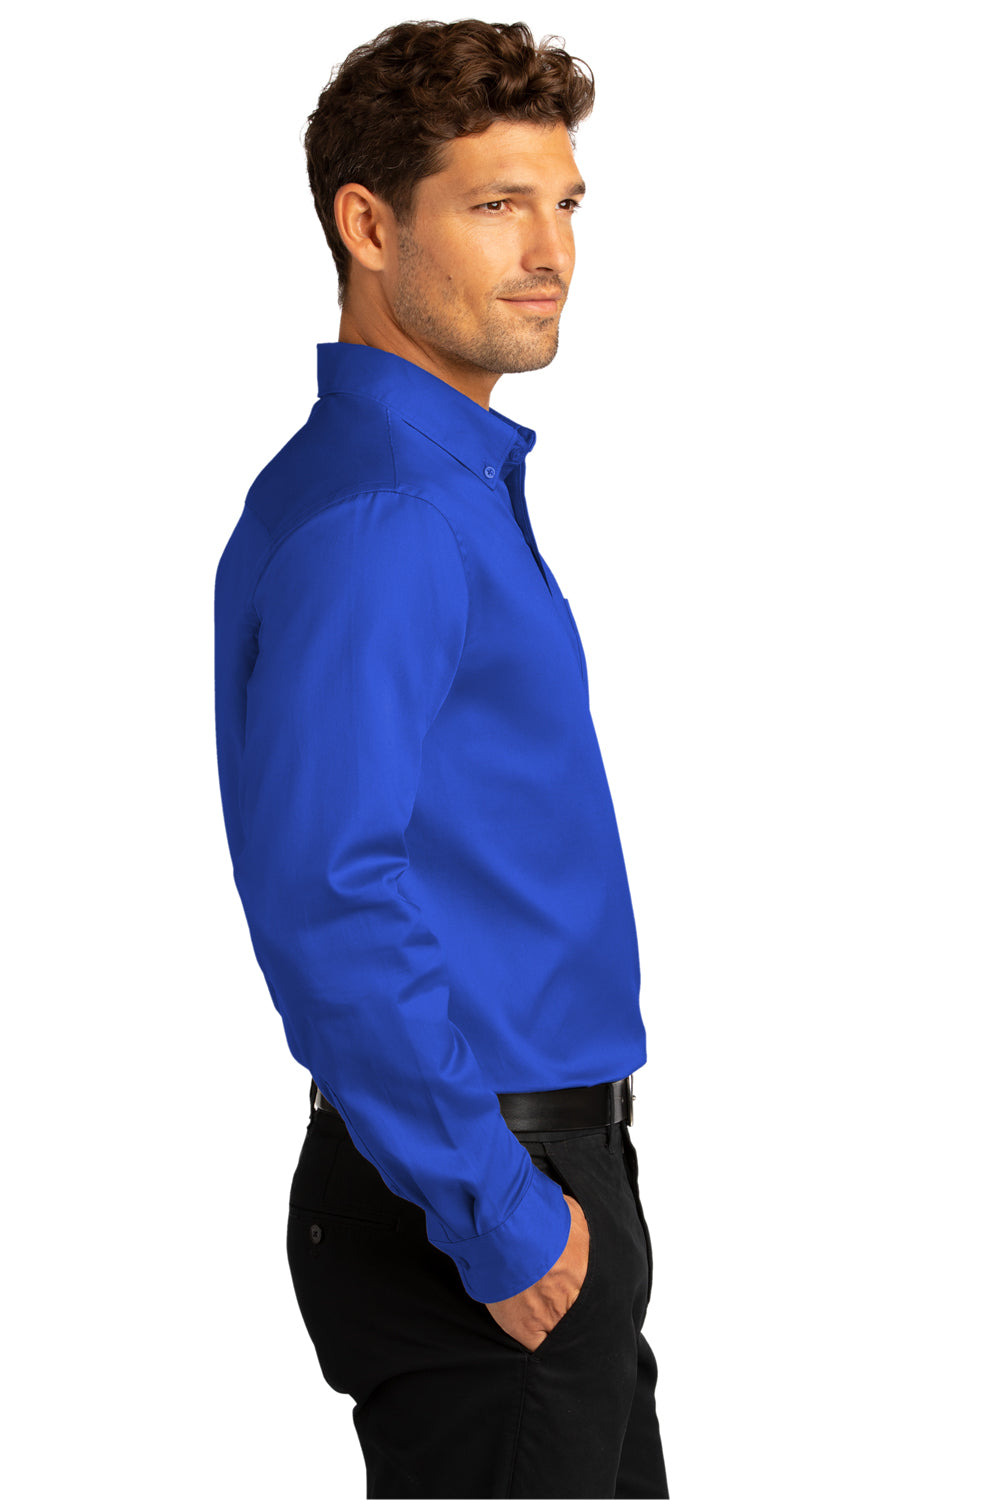 Port Authority Mens SuperPro Wrinkle Resistant React Long Sleeve Button Down Shirt w/ Pocket True Royal Blue Side